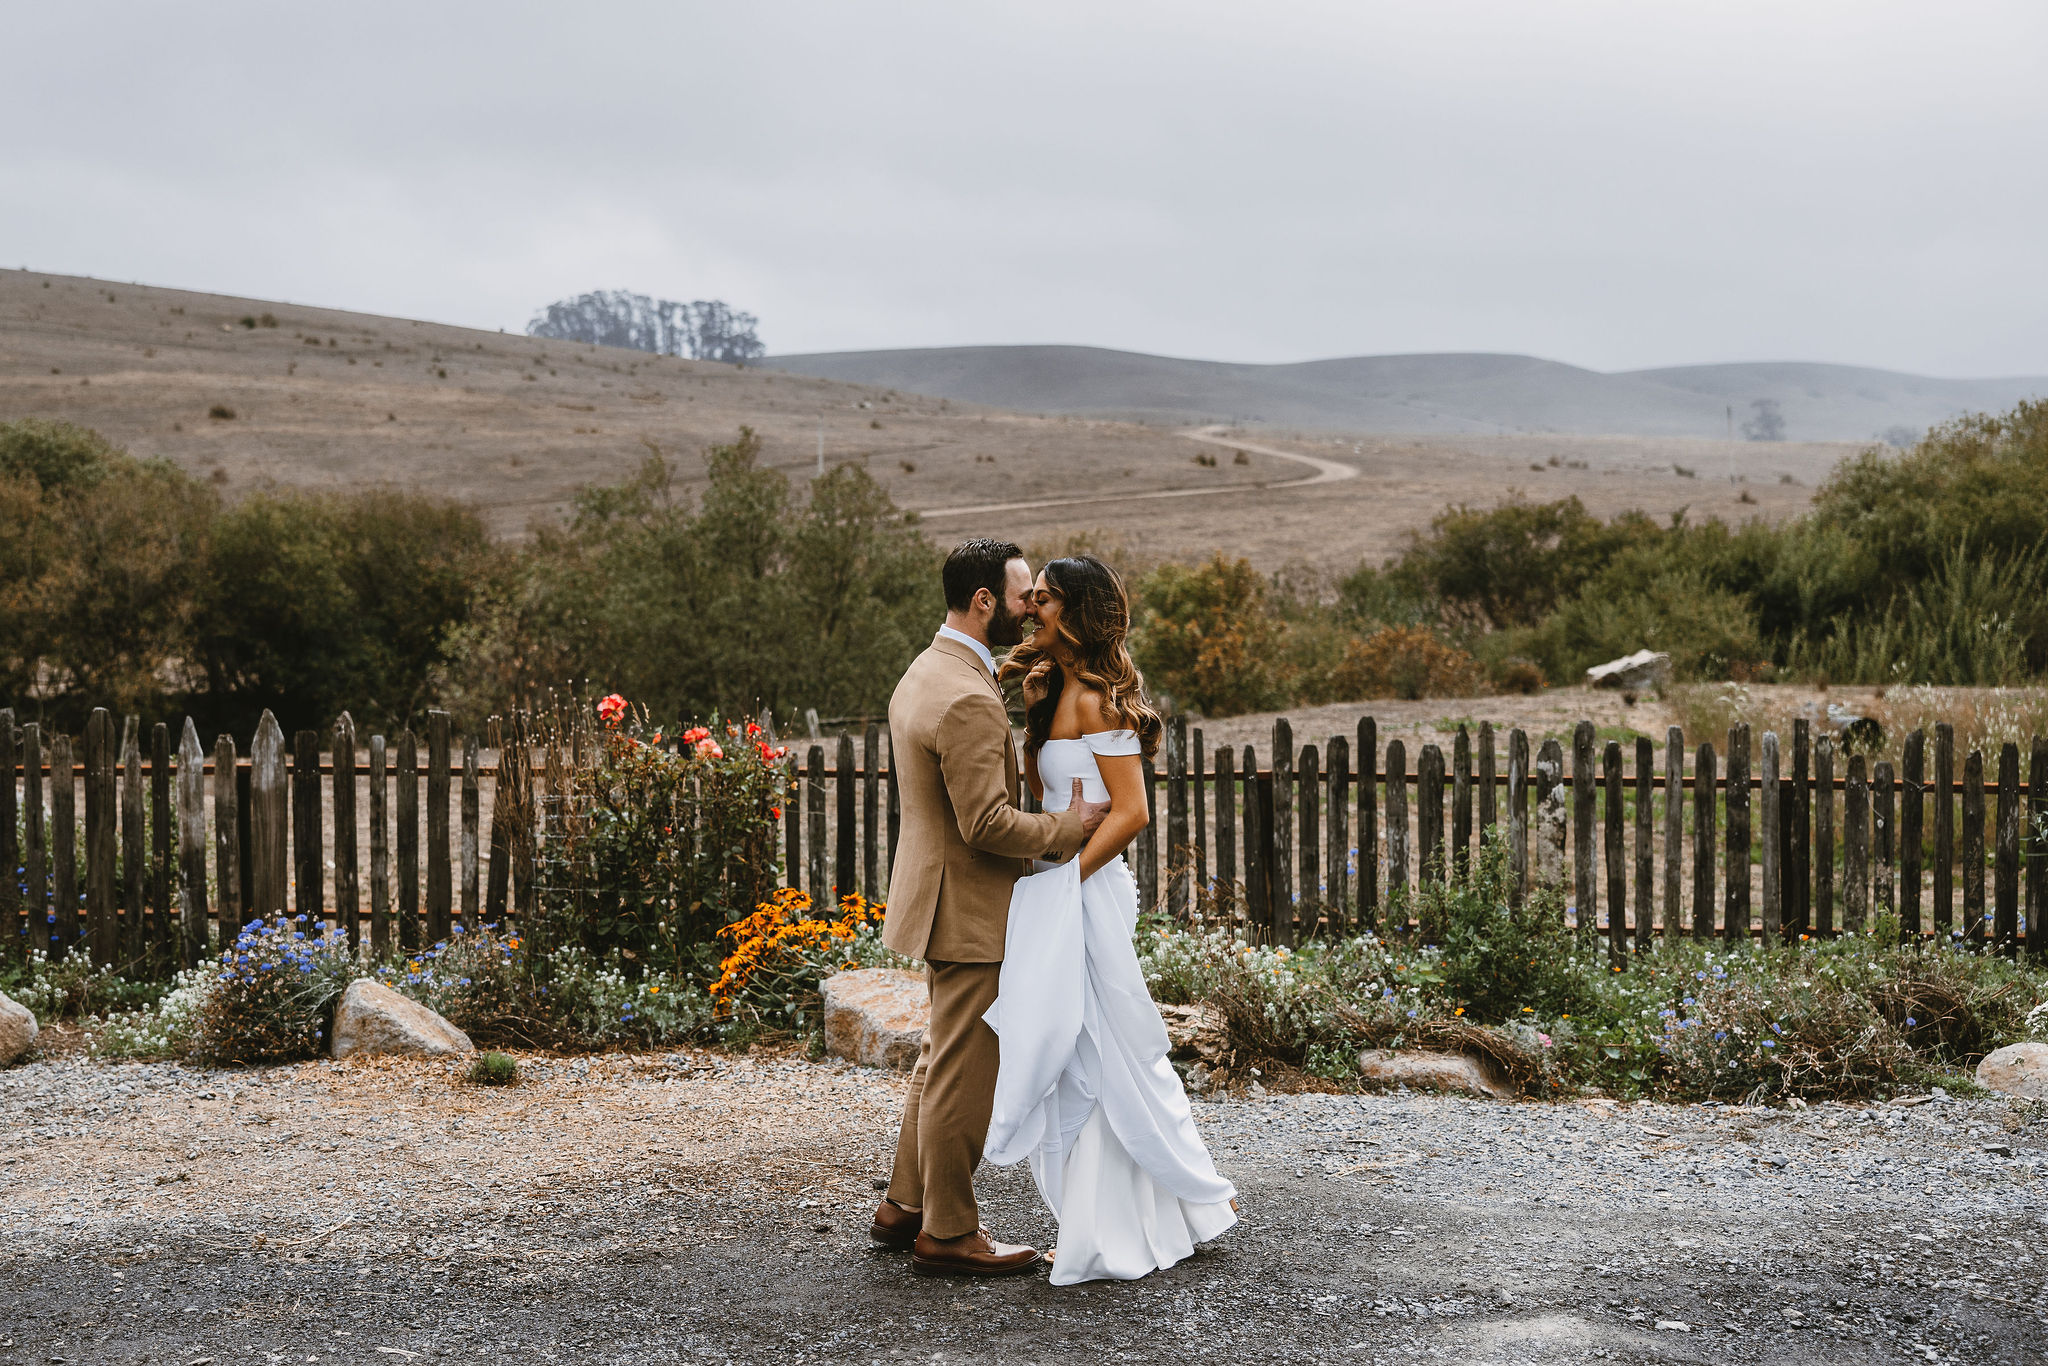 Bride and groom share a joyful embrance amist the rolling hills during first look at stemple creek ranch